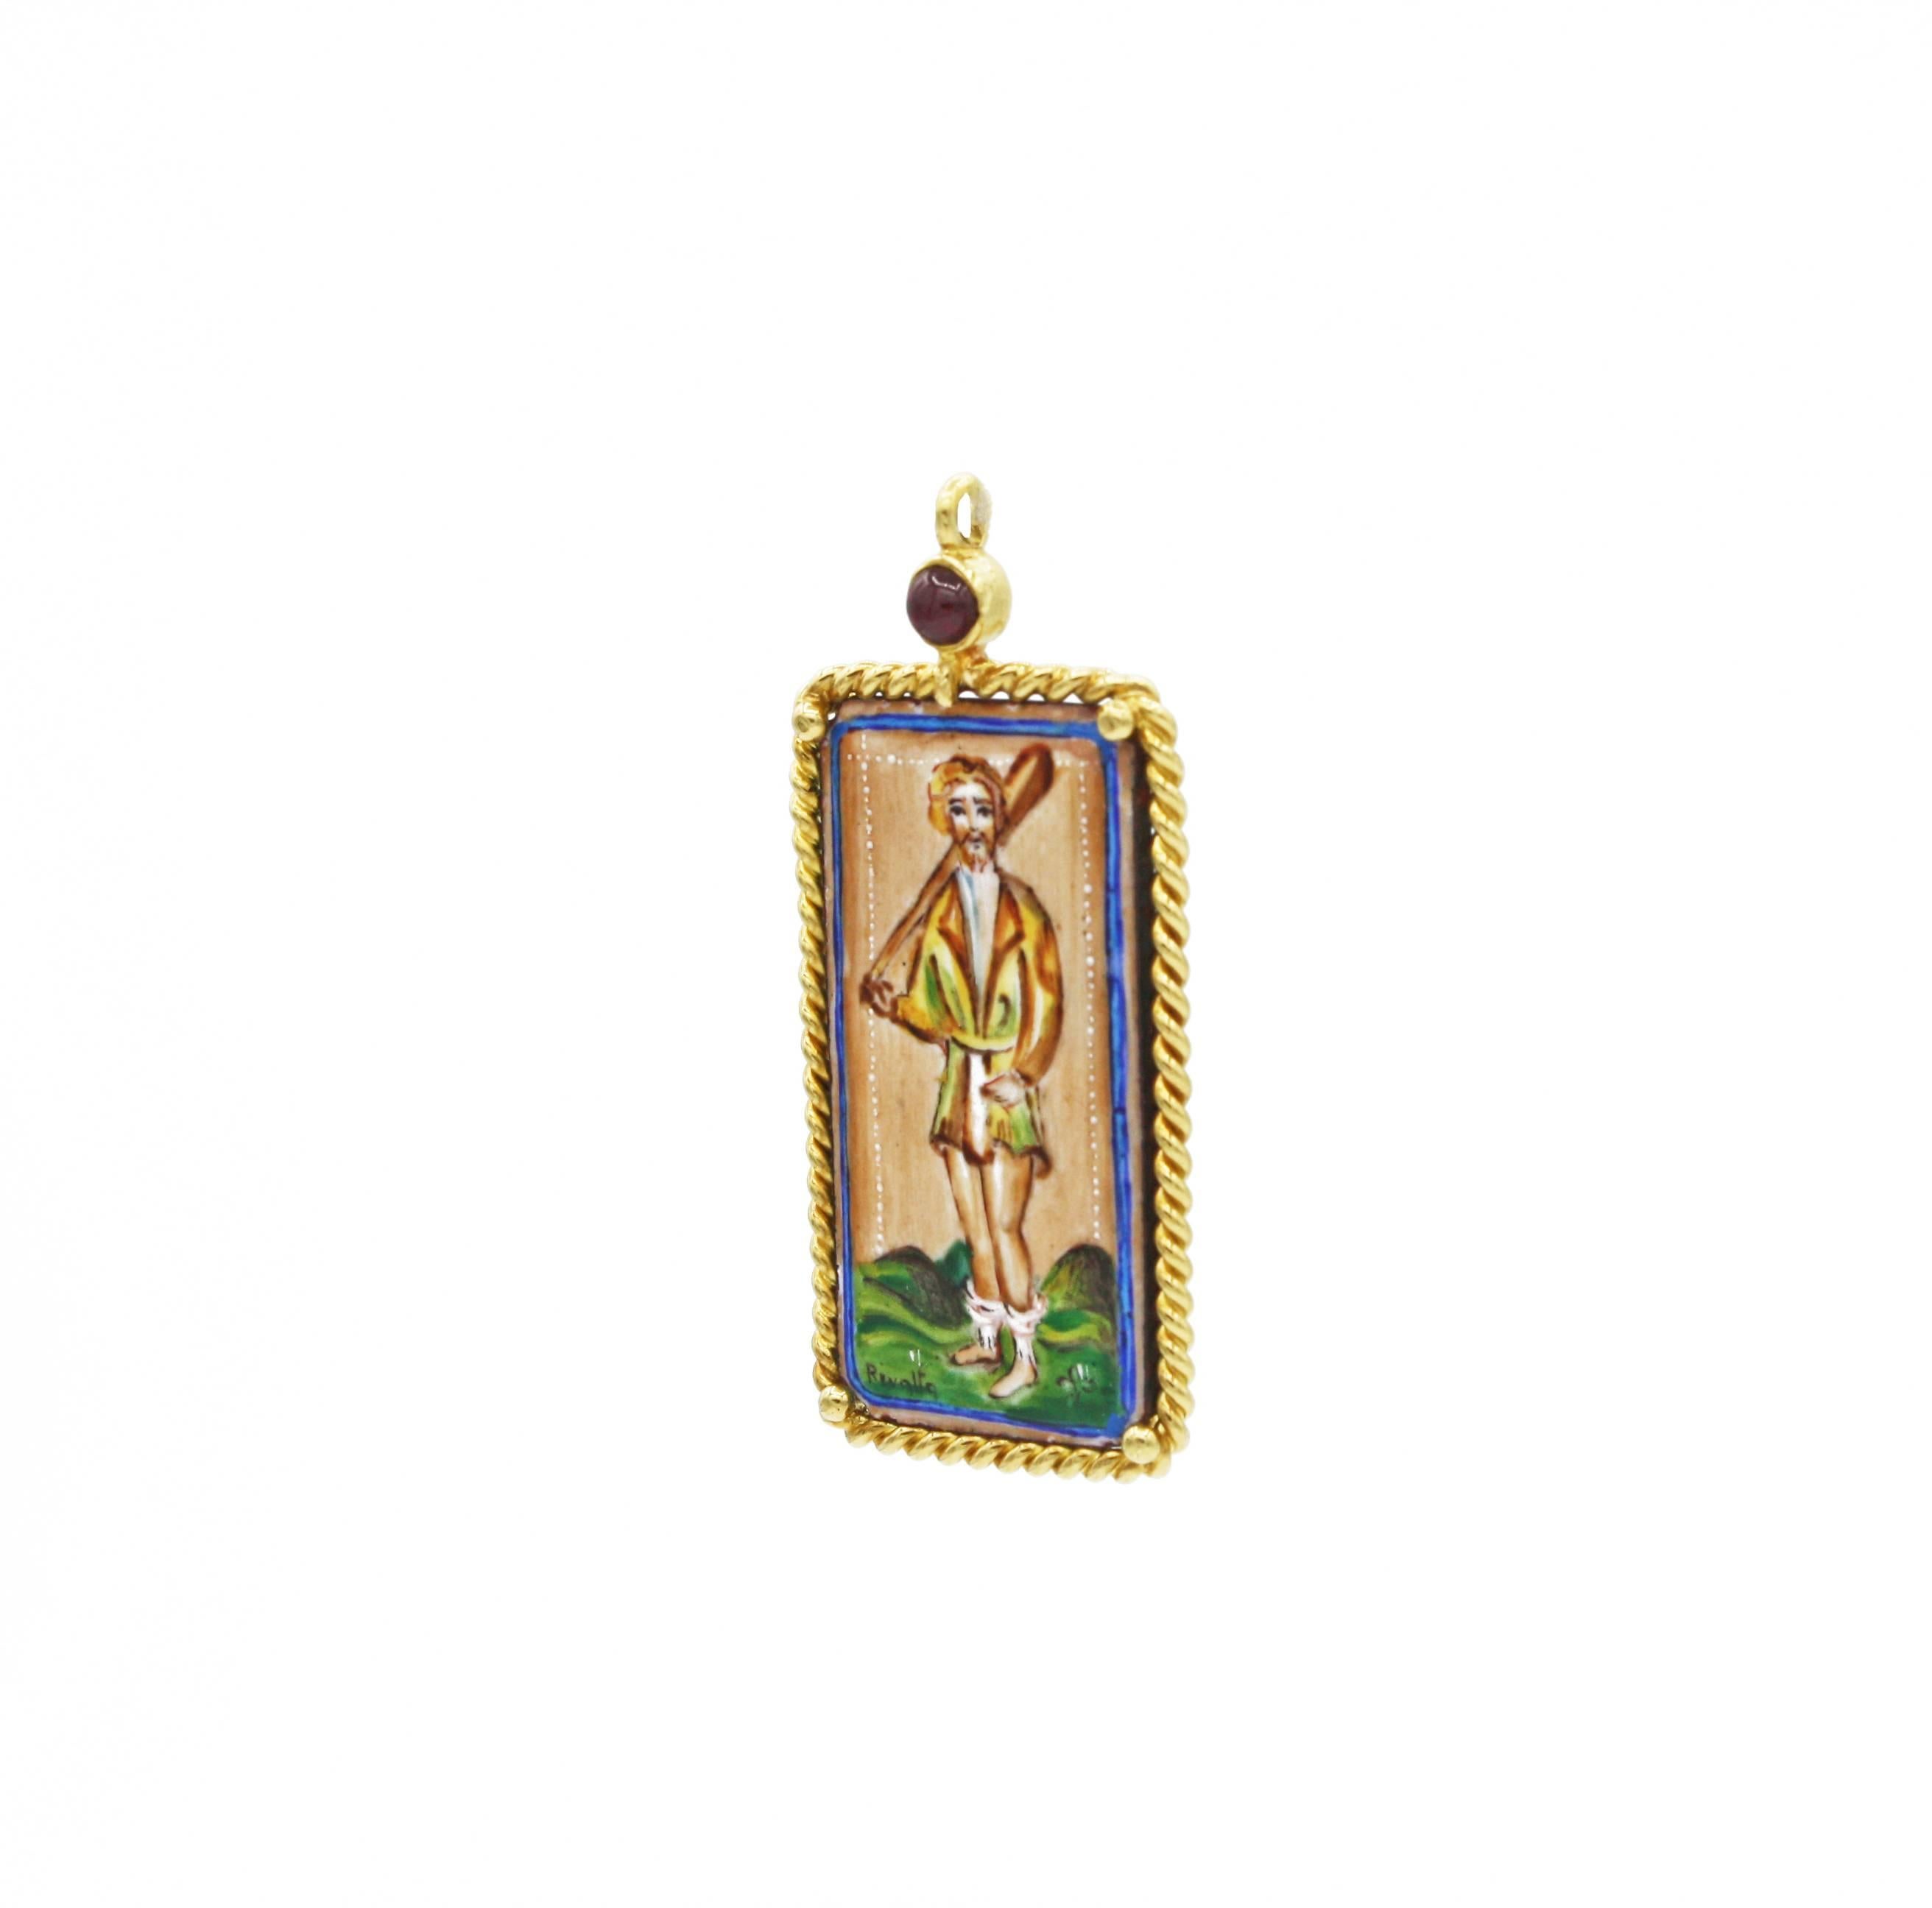 This rare, hand-painted enamel tarot card pendant is set in an 18kt gold frame with rope detailing.  Adding to its special qualities, there is a round cut ruby set into the top of the pendant. The tarot card pictured is the 